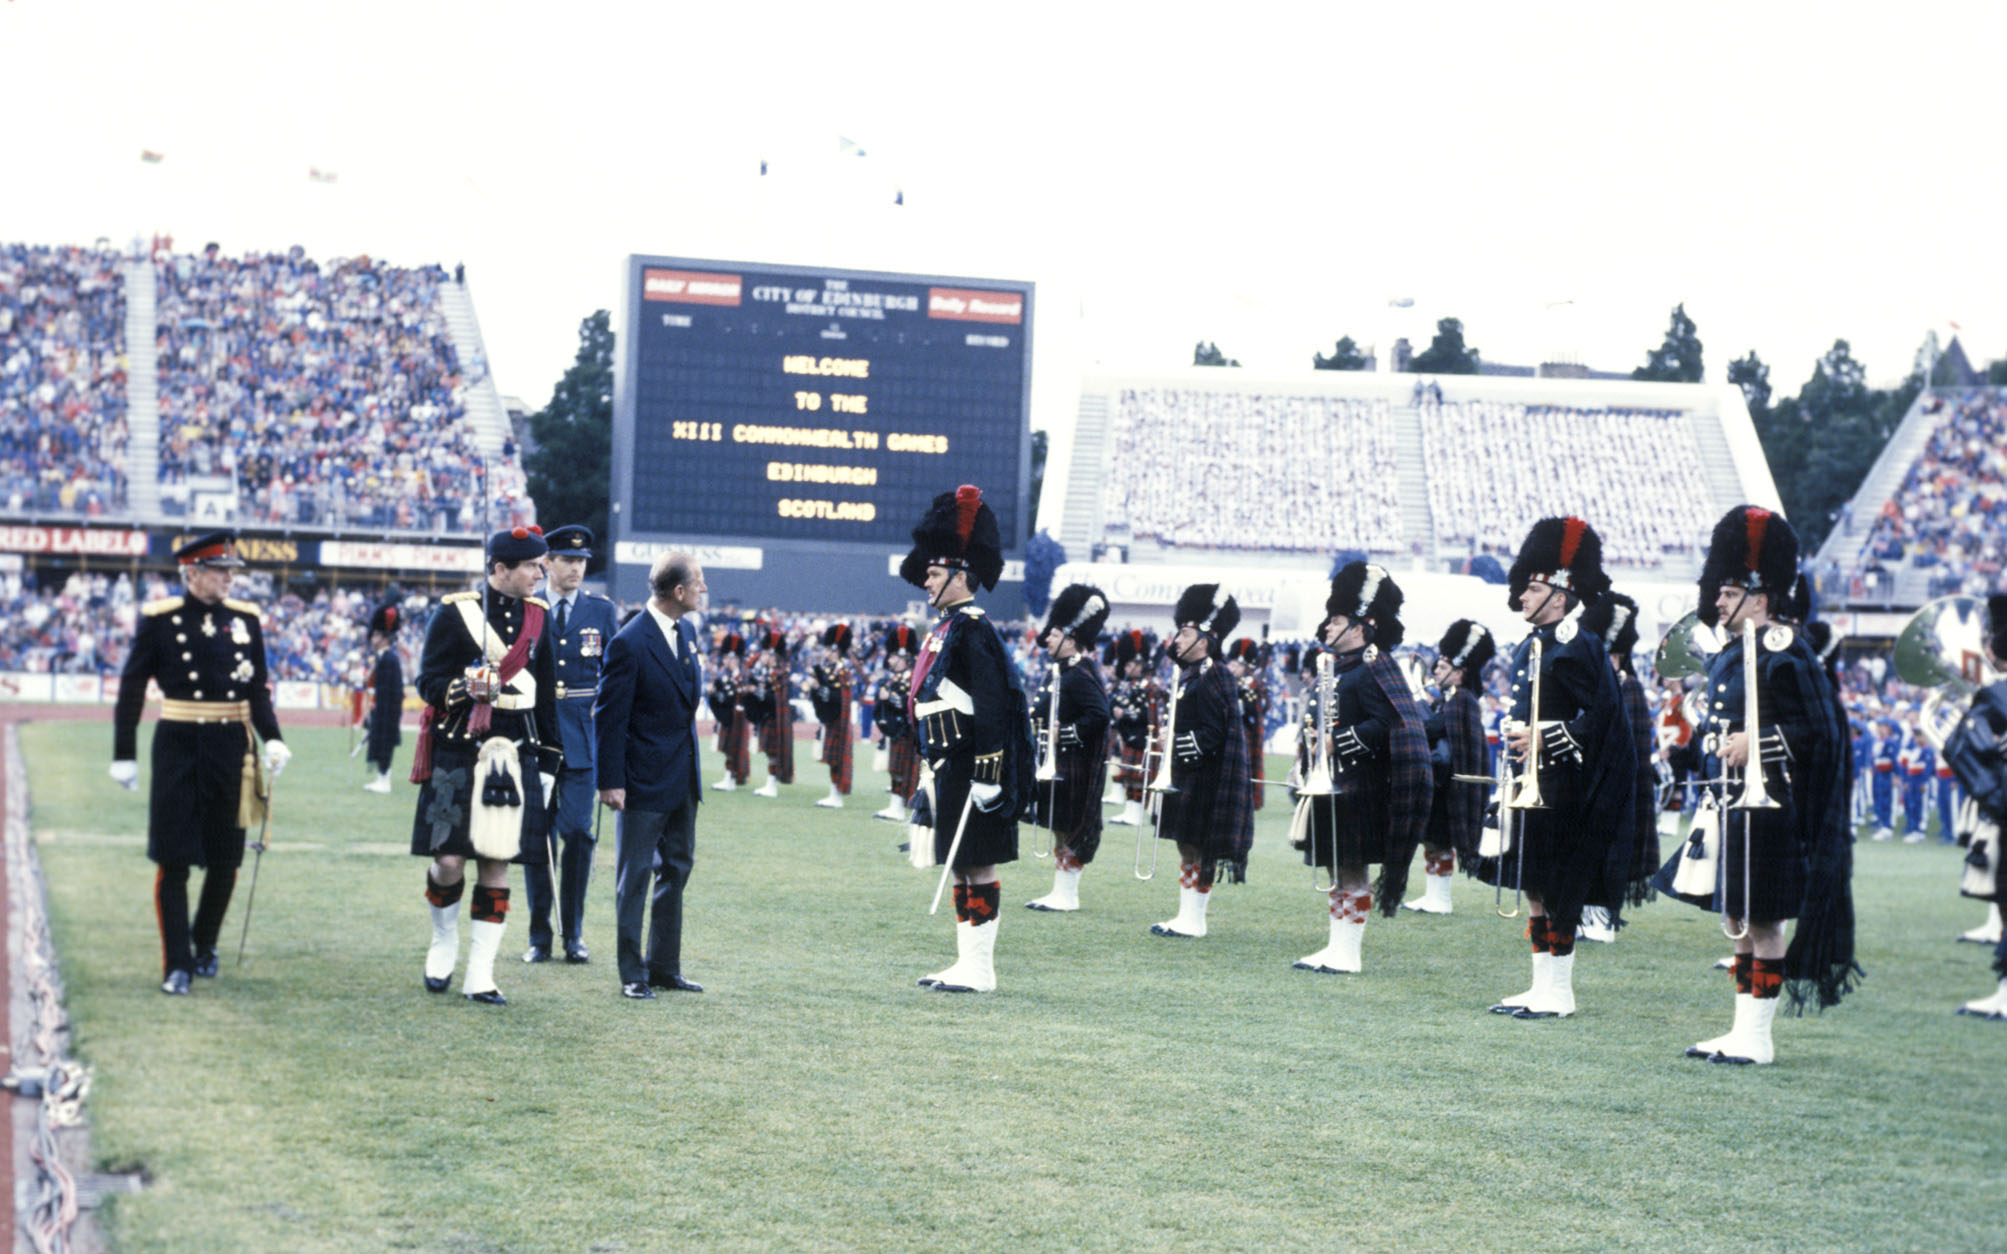 Daily Mirror and Daily Record adverts adorned the scoreboard as the Duke of Edinburgh attended the opening ceremony at Meadowbank Stadium.